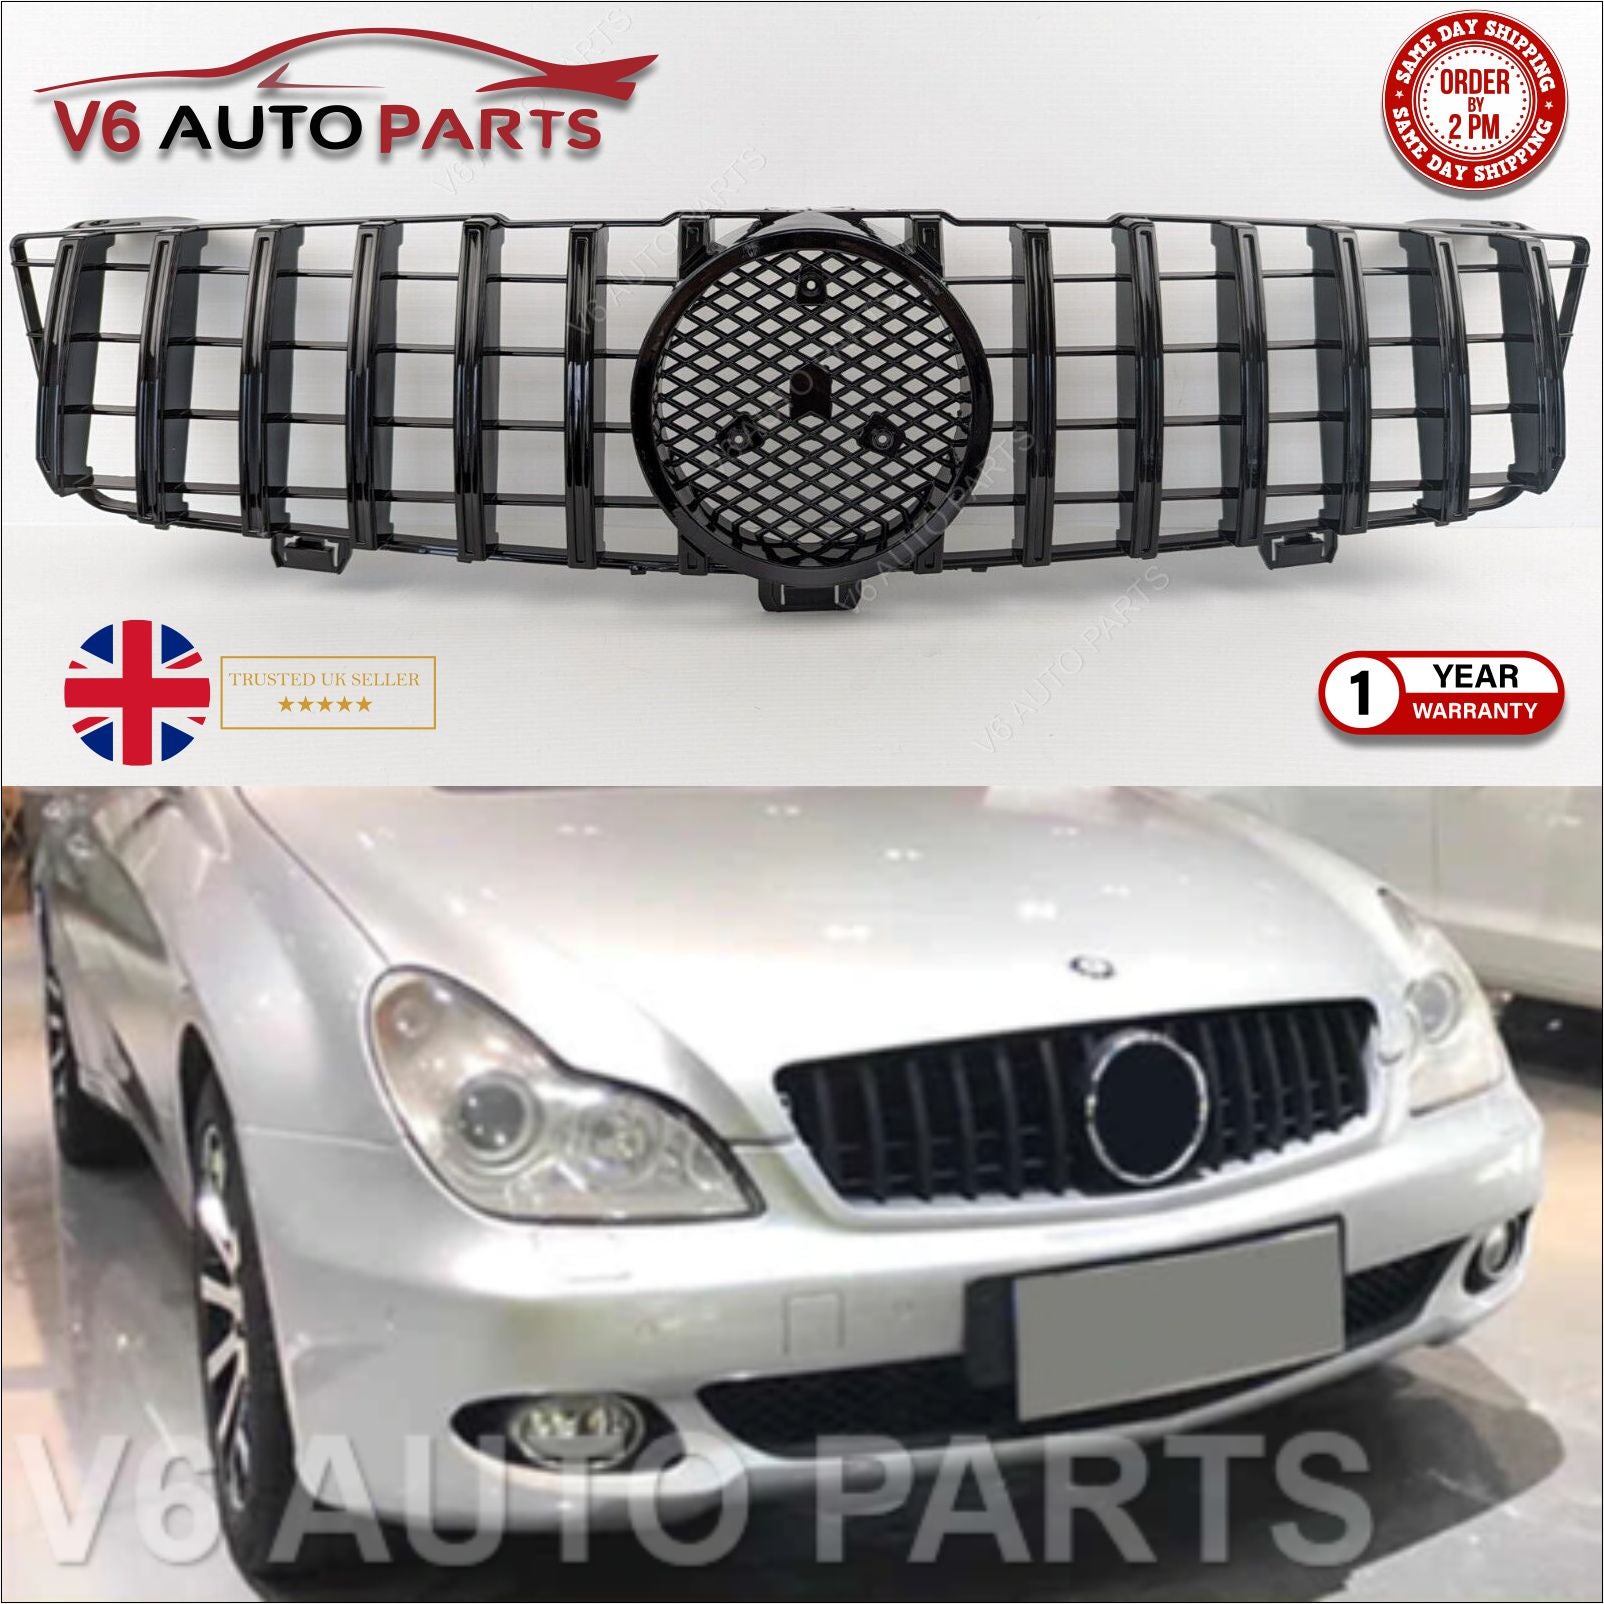 For Mercedes W219 CLS-Class CLS500 CLS350 Front Radiator GT Grille AMG 2008-2010